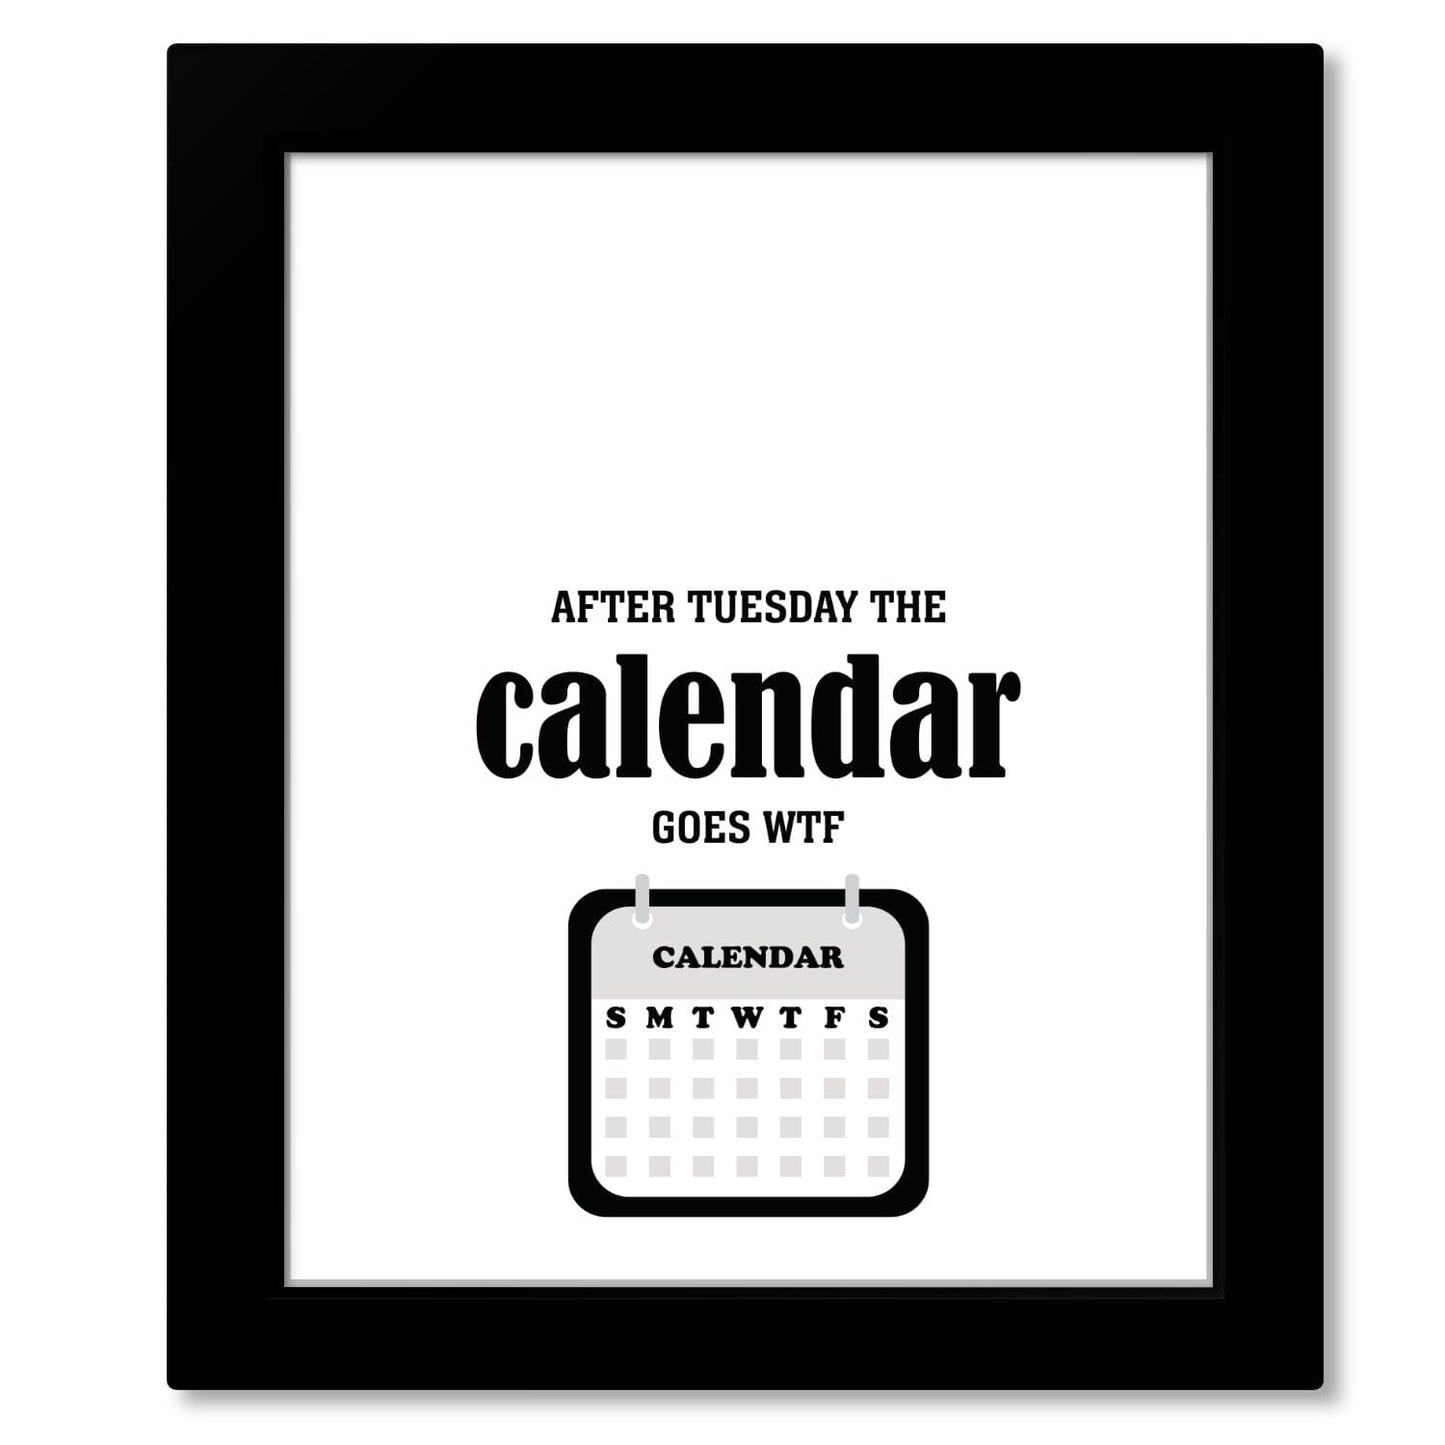 Wise and Witty Print - After Tuesday the Calendar Goes WTF Wise and Wiseass Quotes Song Lyrics Art 